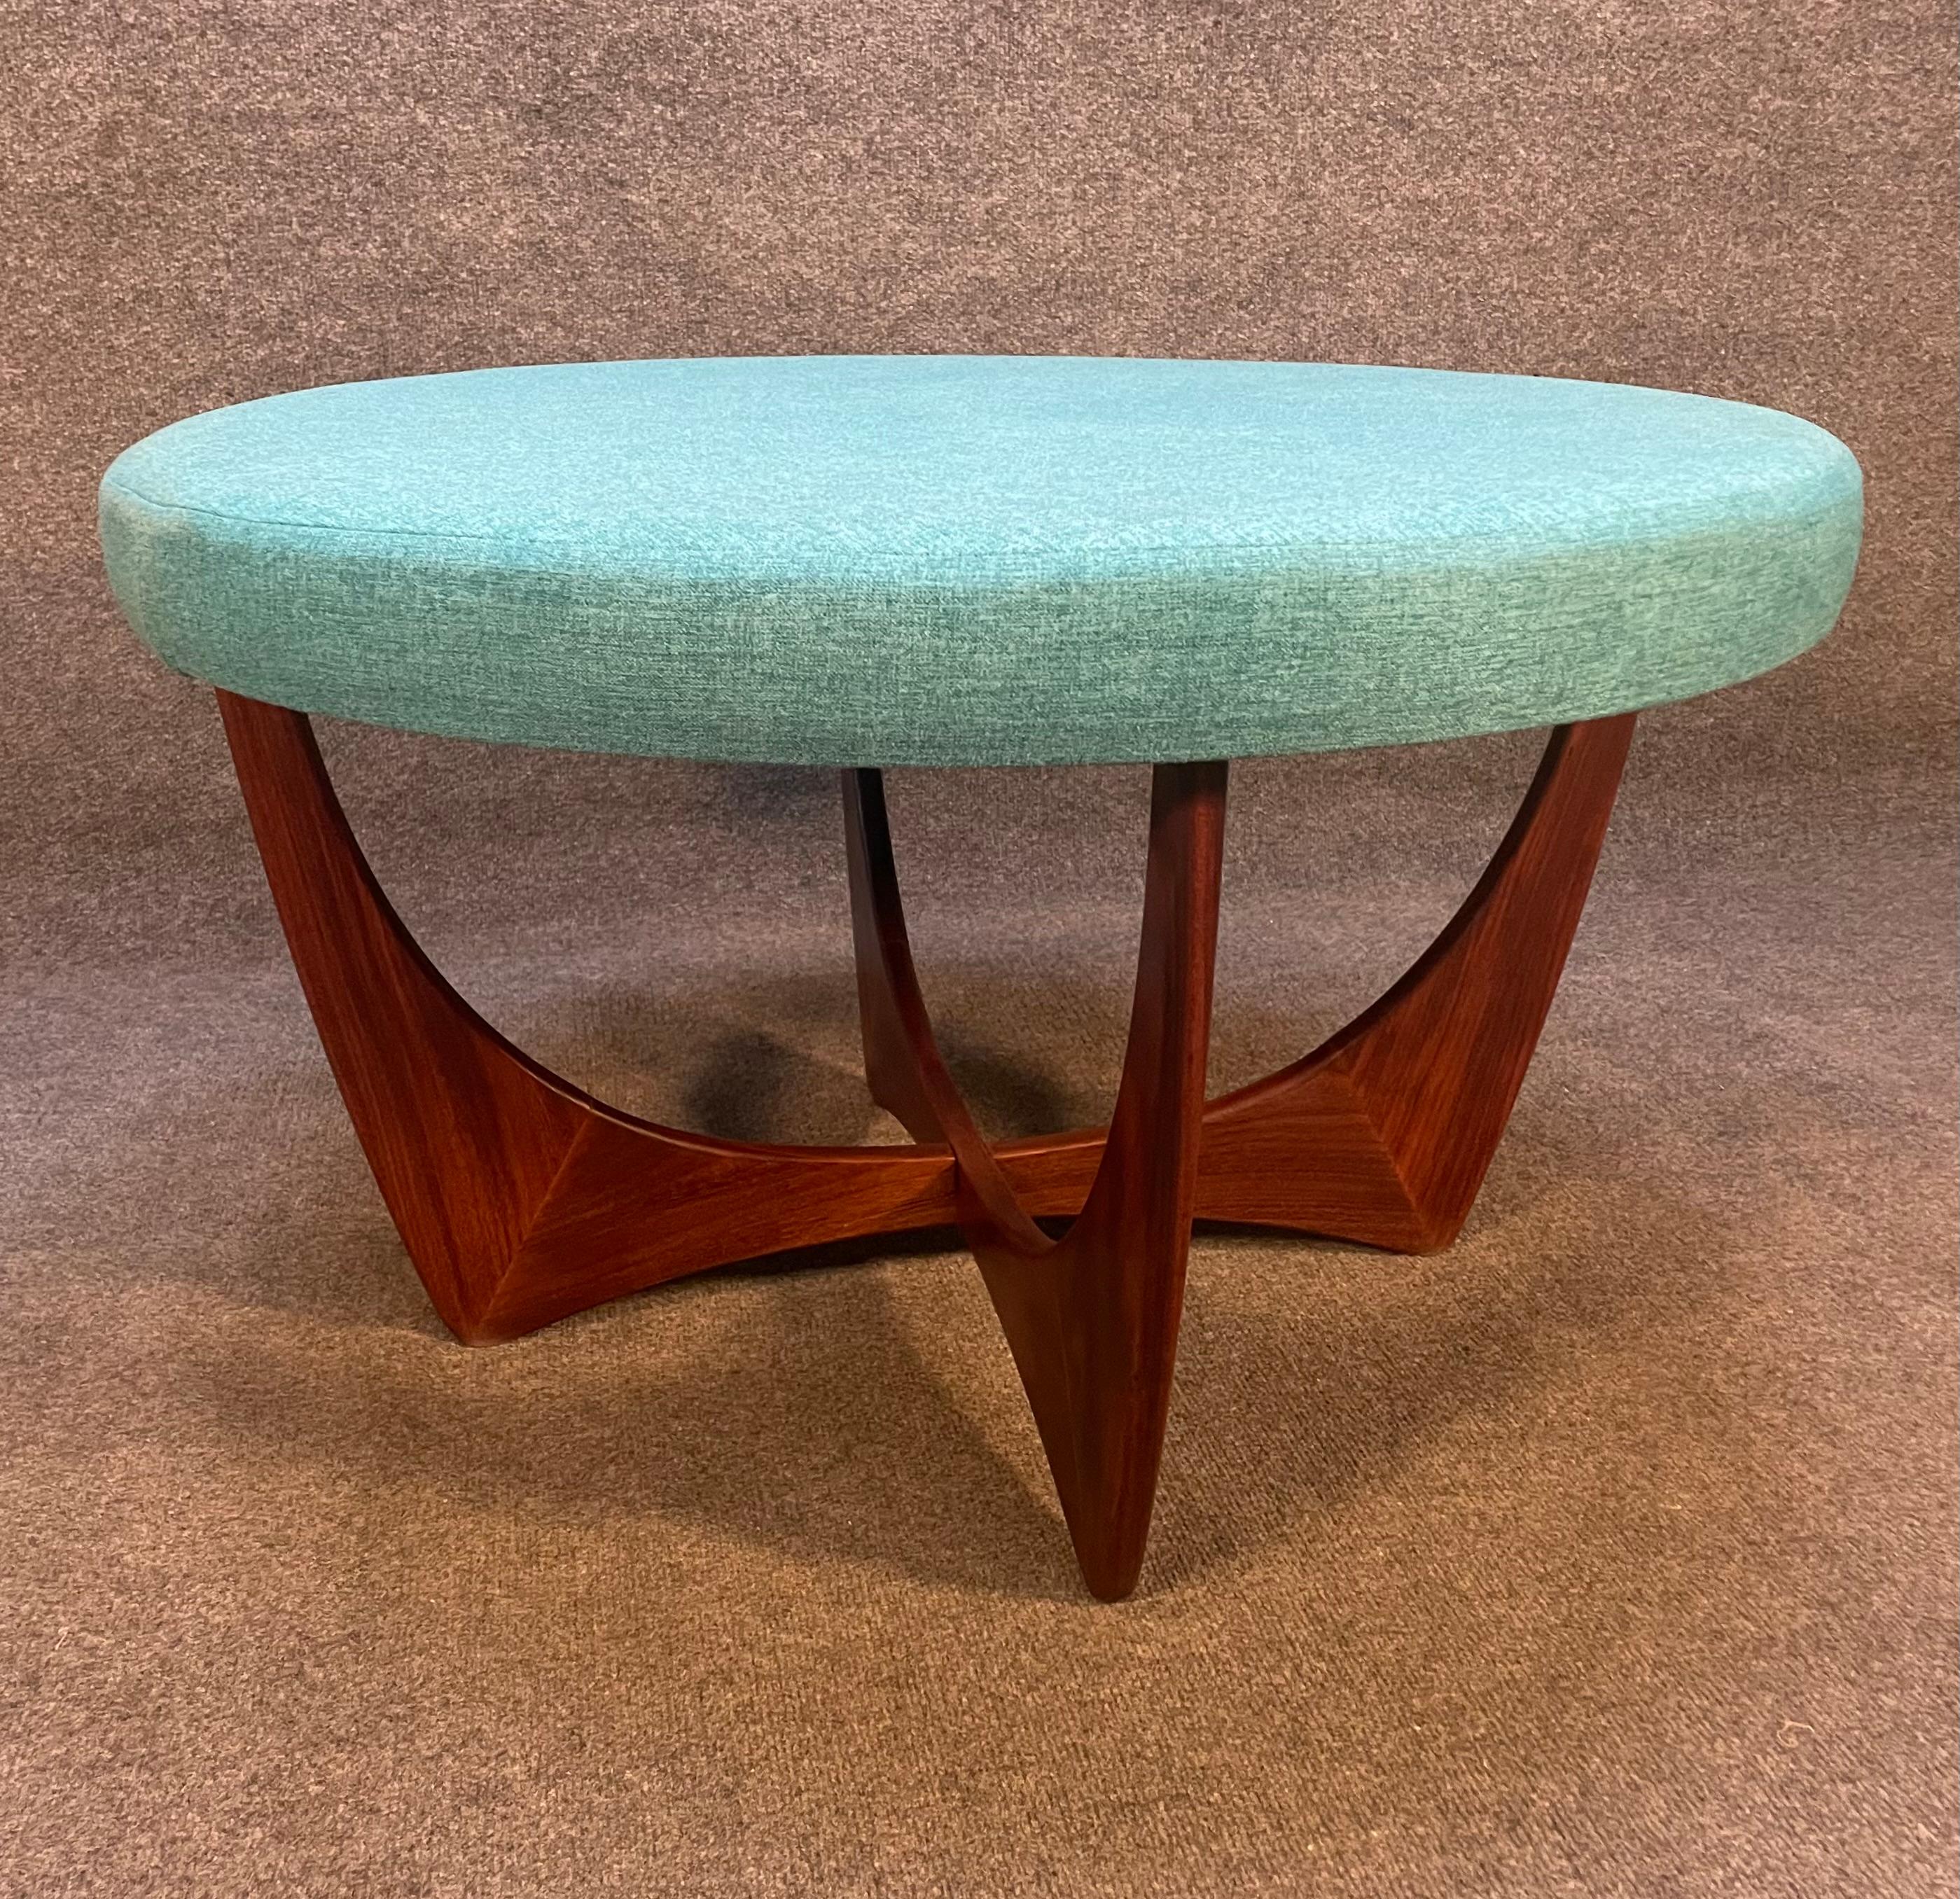 Here is a very special British Mid-Century Modern foot stool from the 